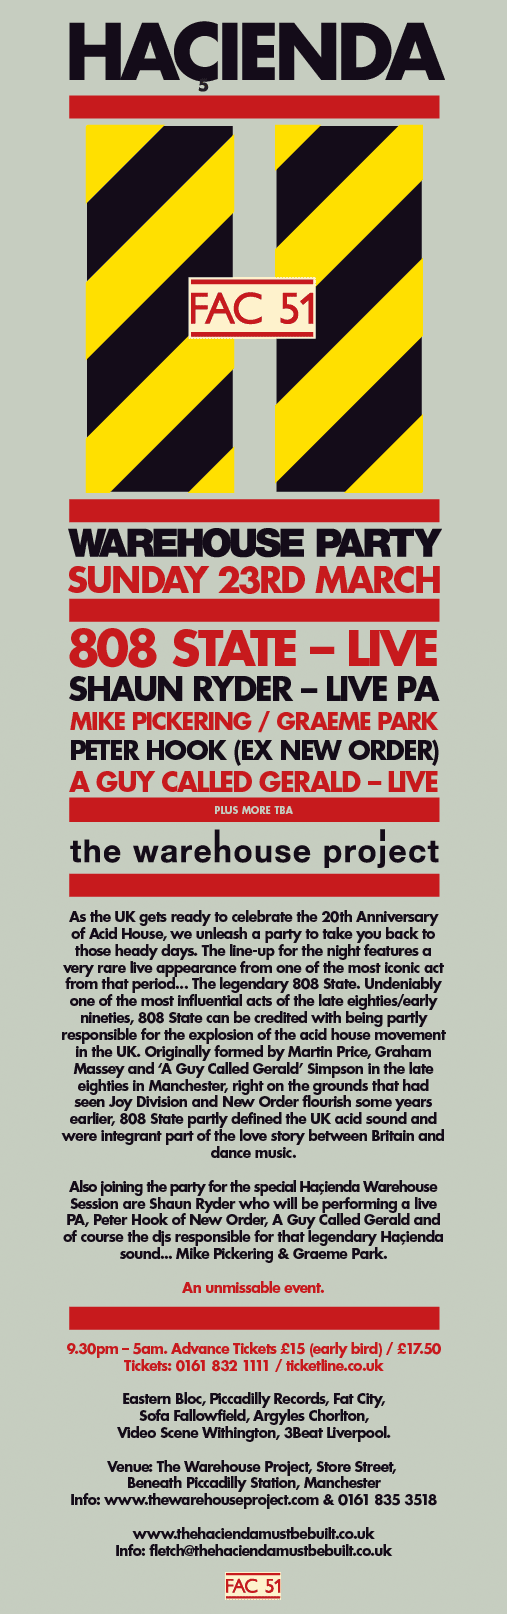 23 March: The Lost Weekends Part 1, The Warehouse Project, Store Street, Manchester, England